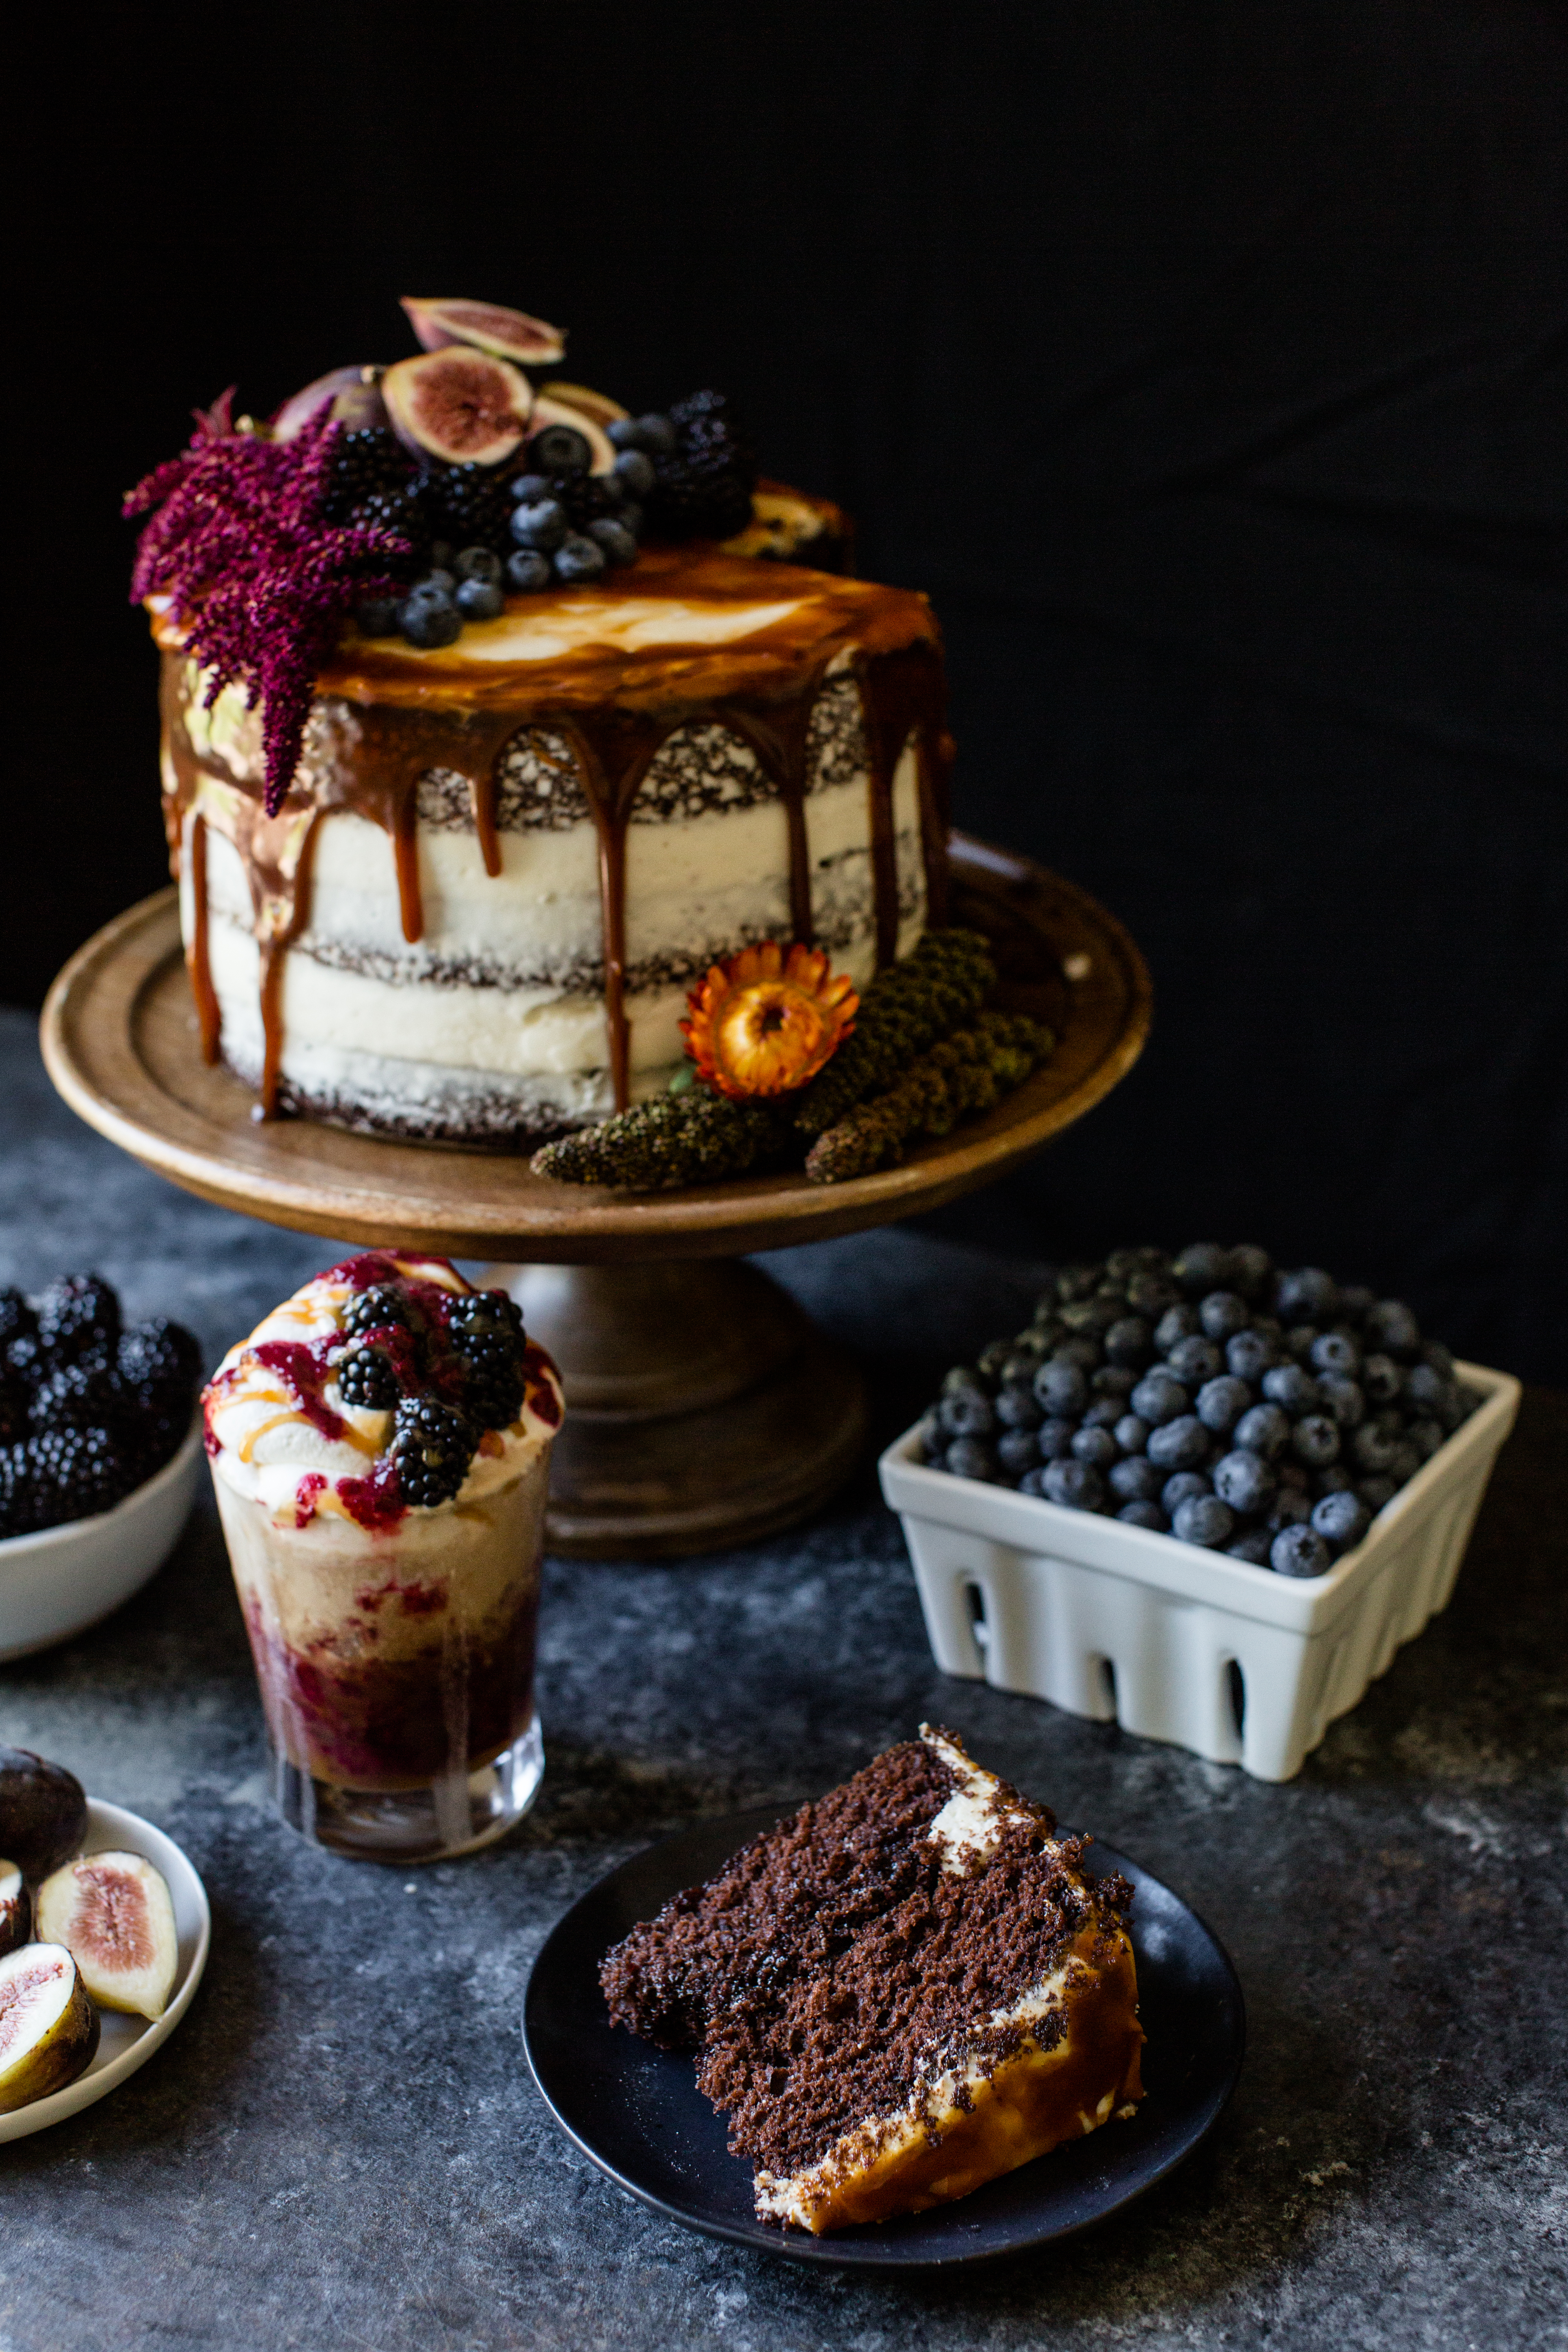 a cake on a stand with a slice in front of it and a clamshell of blueberries on the side.